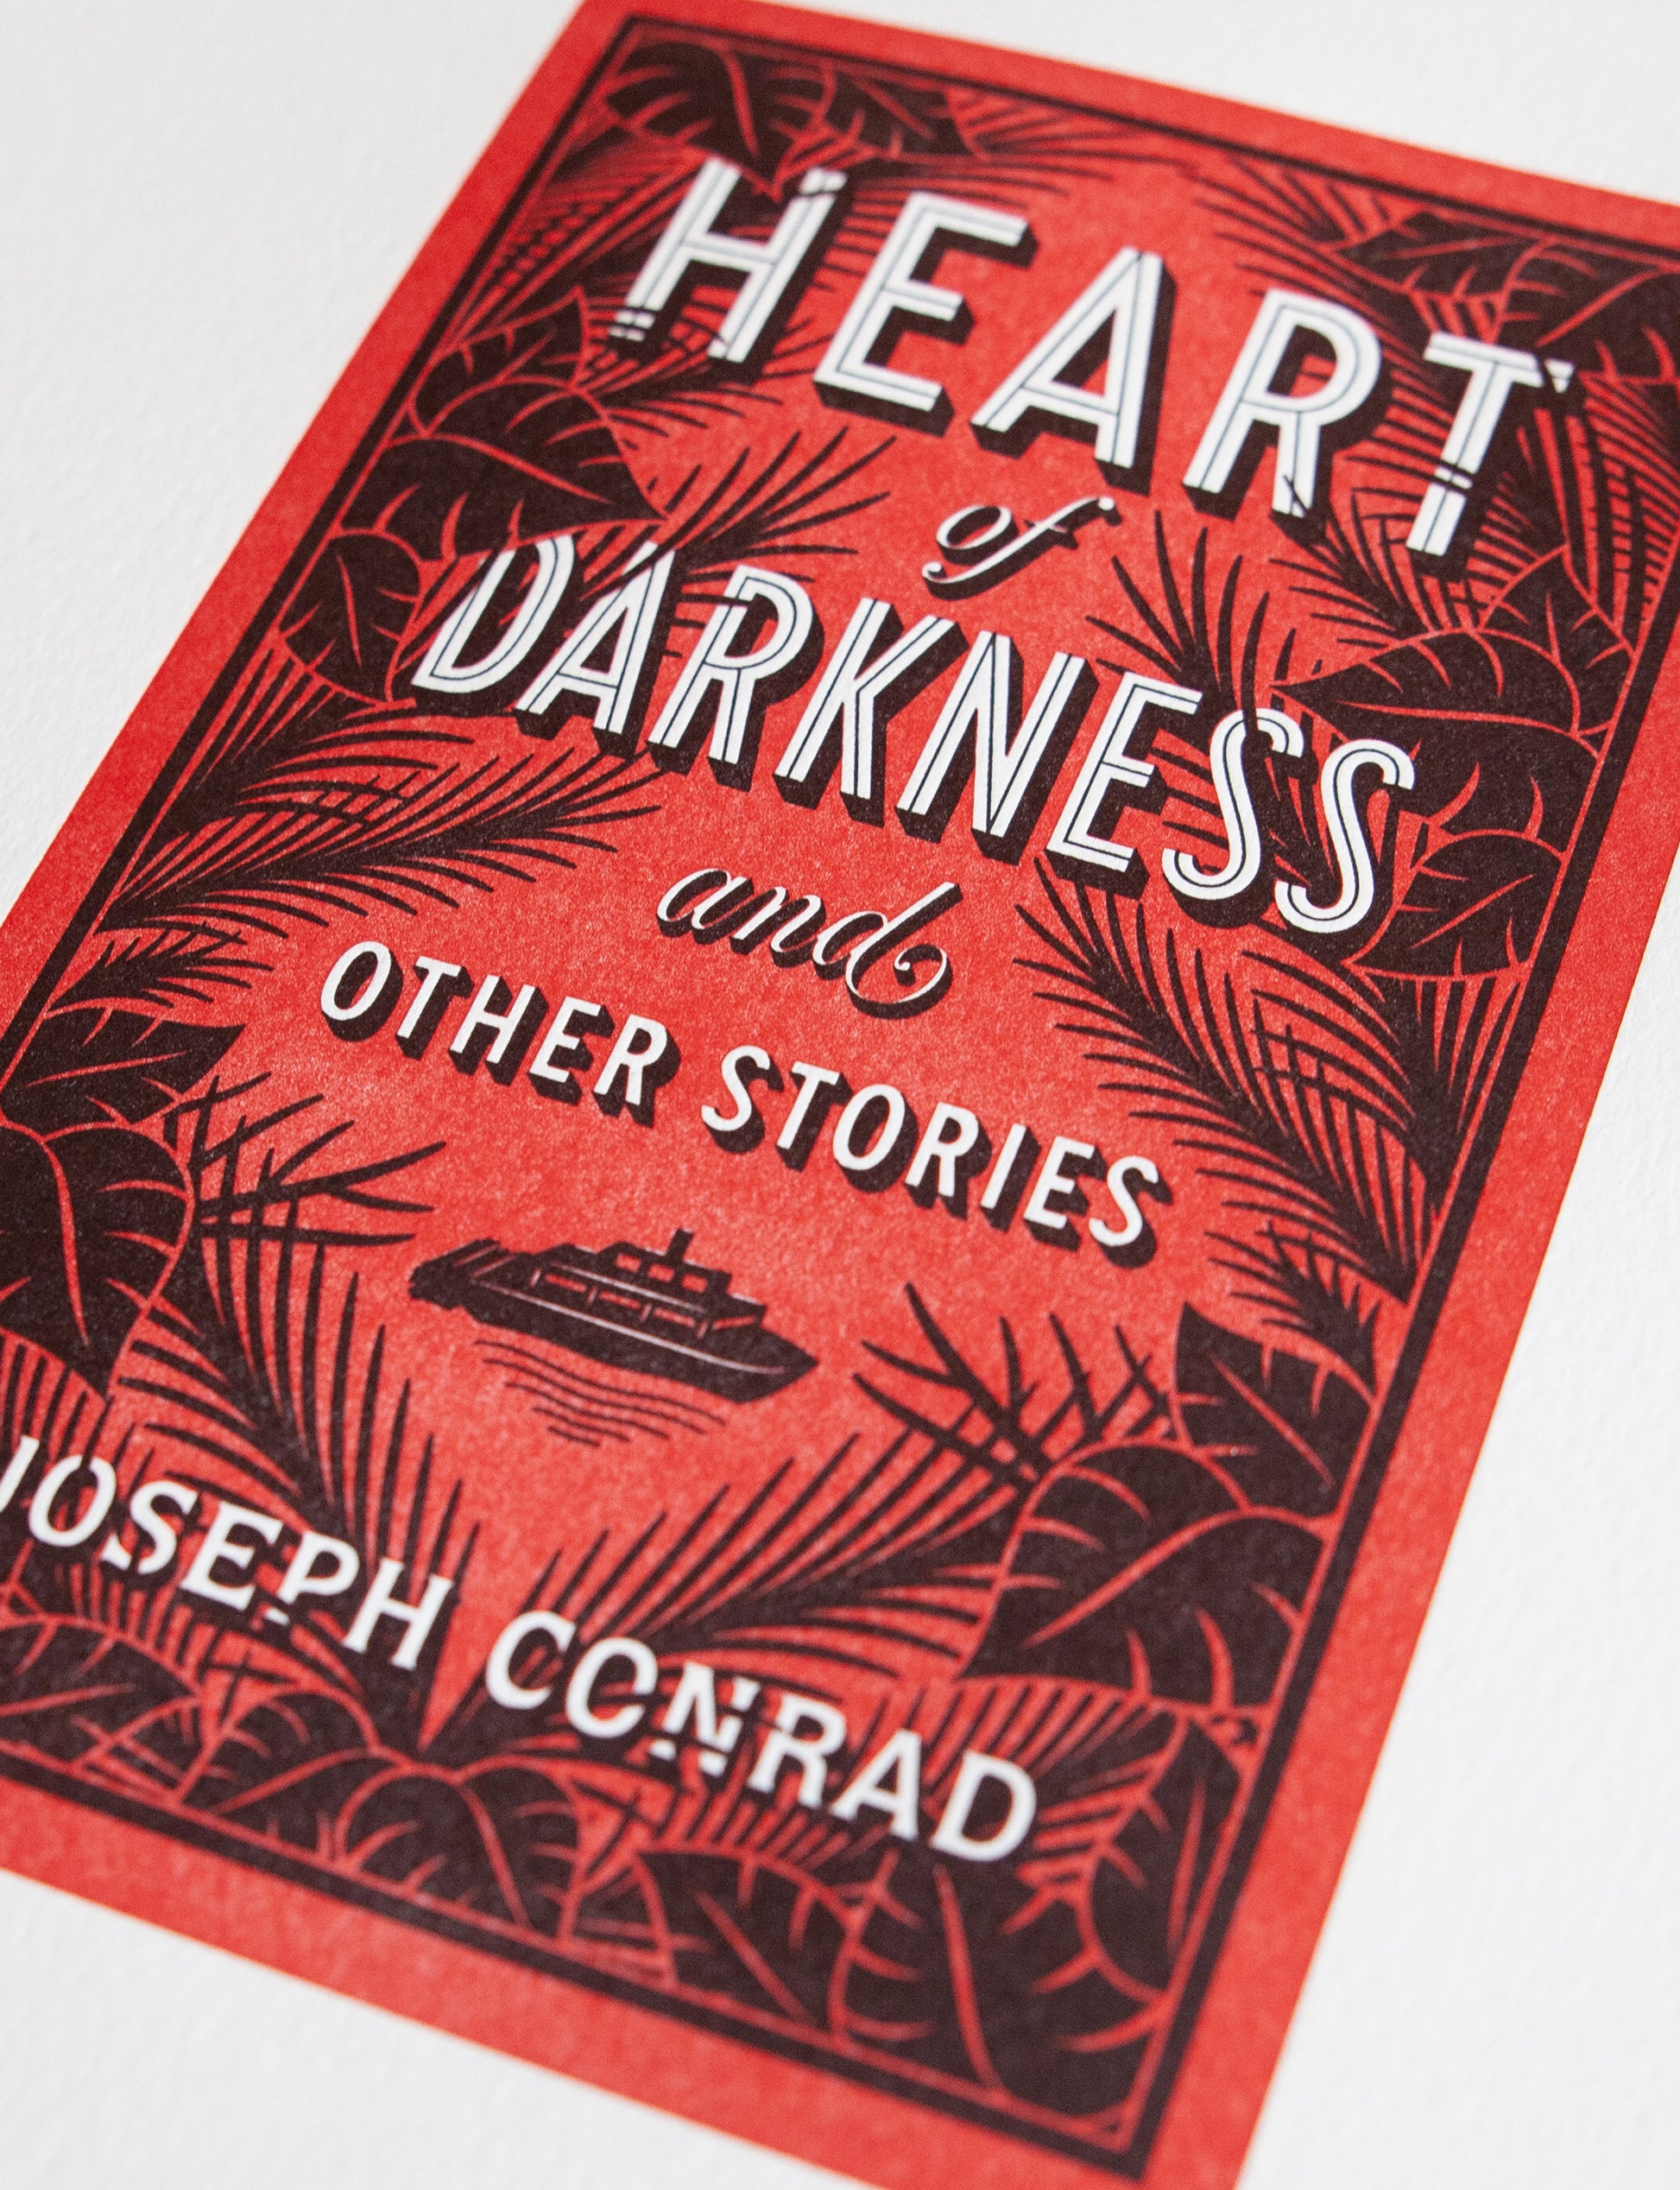 Close-up of a 2-color letterpress print in red and black. Printed artwork is an illustrated book cover of Heart of Darkness including custom hand lettering.